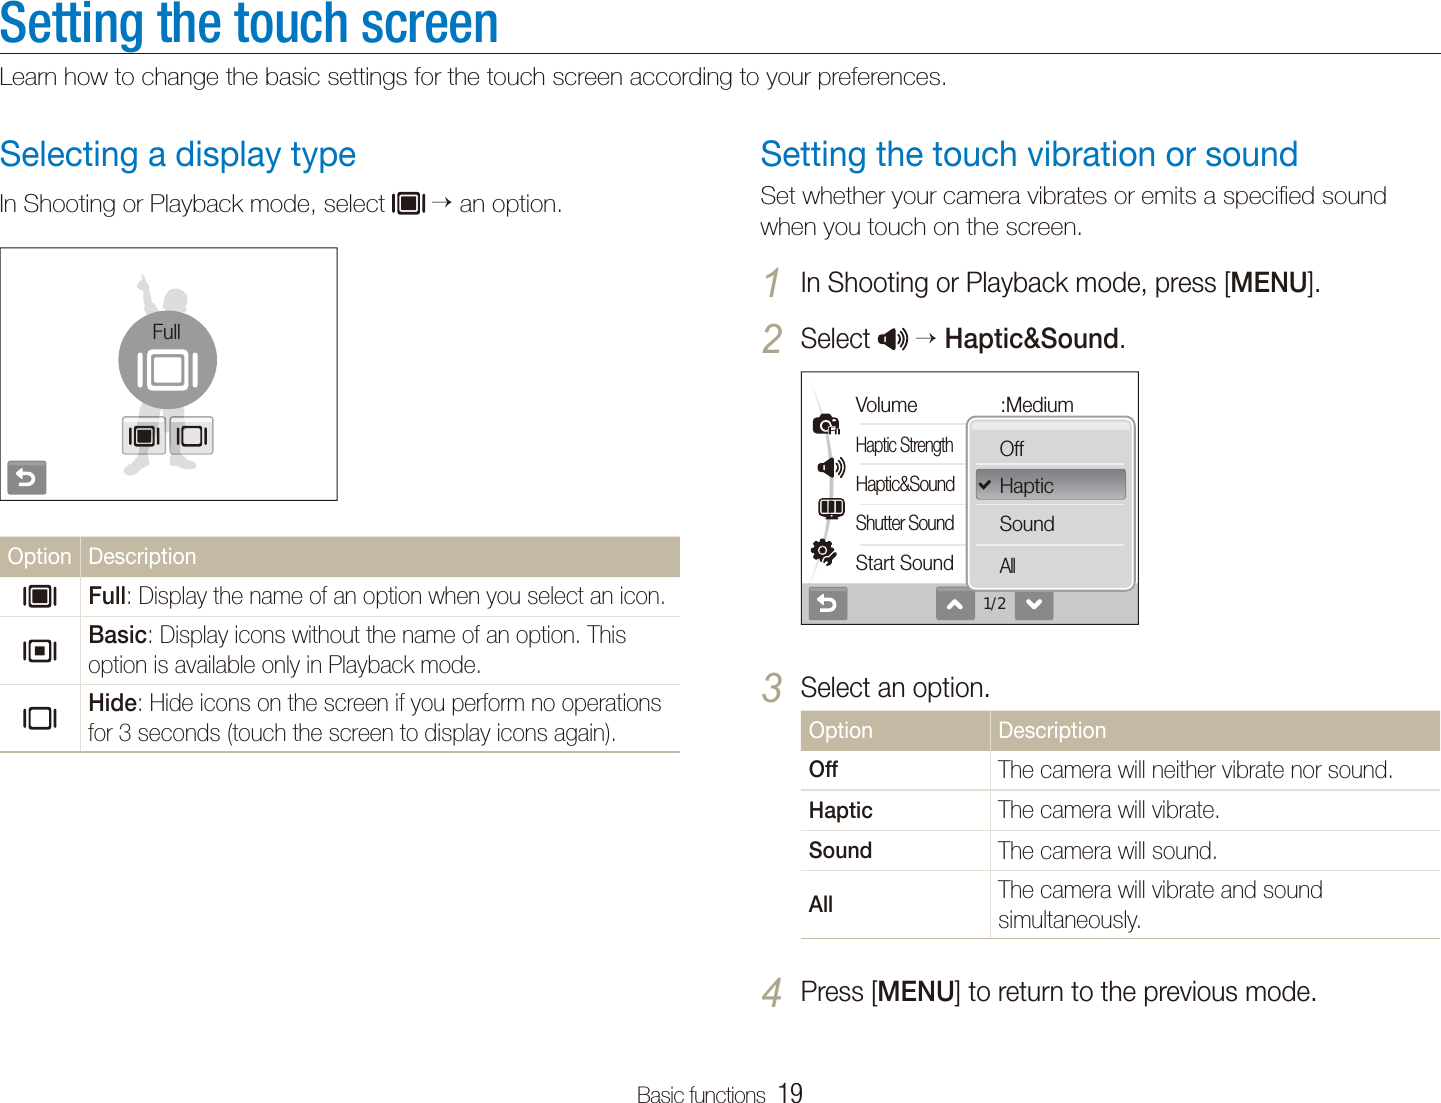 Basic functions  19Setting the touch screenLearn how to change the basic settings for the touch screen according to your preferences.Setting the touch vibration or soundSet whether your camera vibrates or emits a speciﬁed sound when you touch on the screen.In Shooting or Playback mode, press [1 MENU].Select 2   Haptic&amp;Sound.1/2Volume :MediumHaptic StrengthHaptic&amp;SoundShutter SoundStart SoundOffHapticSoundAllSelect an option.3 Option DescriptionOffThe camera will neither vibrate nor sound.HapticThe camera will vibrate.SoundThe camera will sound.AllThe camera will vibrate and sound simultaneously.Press [4 MENU] to return to the previous mode.Selecting a display typeIn Shooting or Playback mode, select   an option.FullOption DescriptionFull: Display the name of an option when you select an icon.Basic: Display icons without the name of an option. This option is available only in Playback mode.Hide: Hide icons on the screen if you perform no operations for 3 seconds (touch the screen to display icons again).